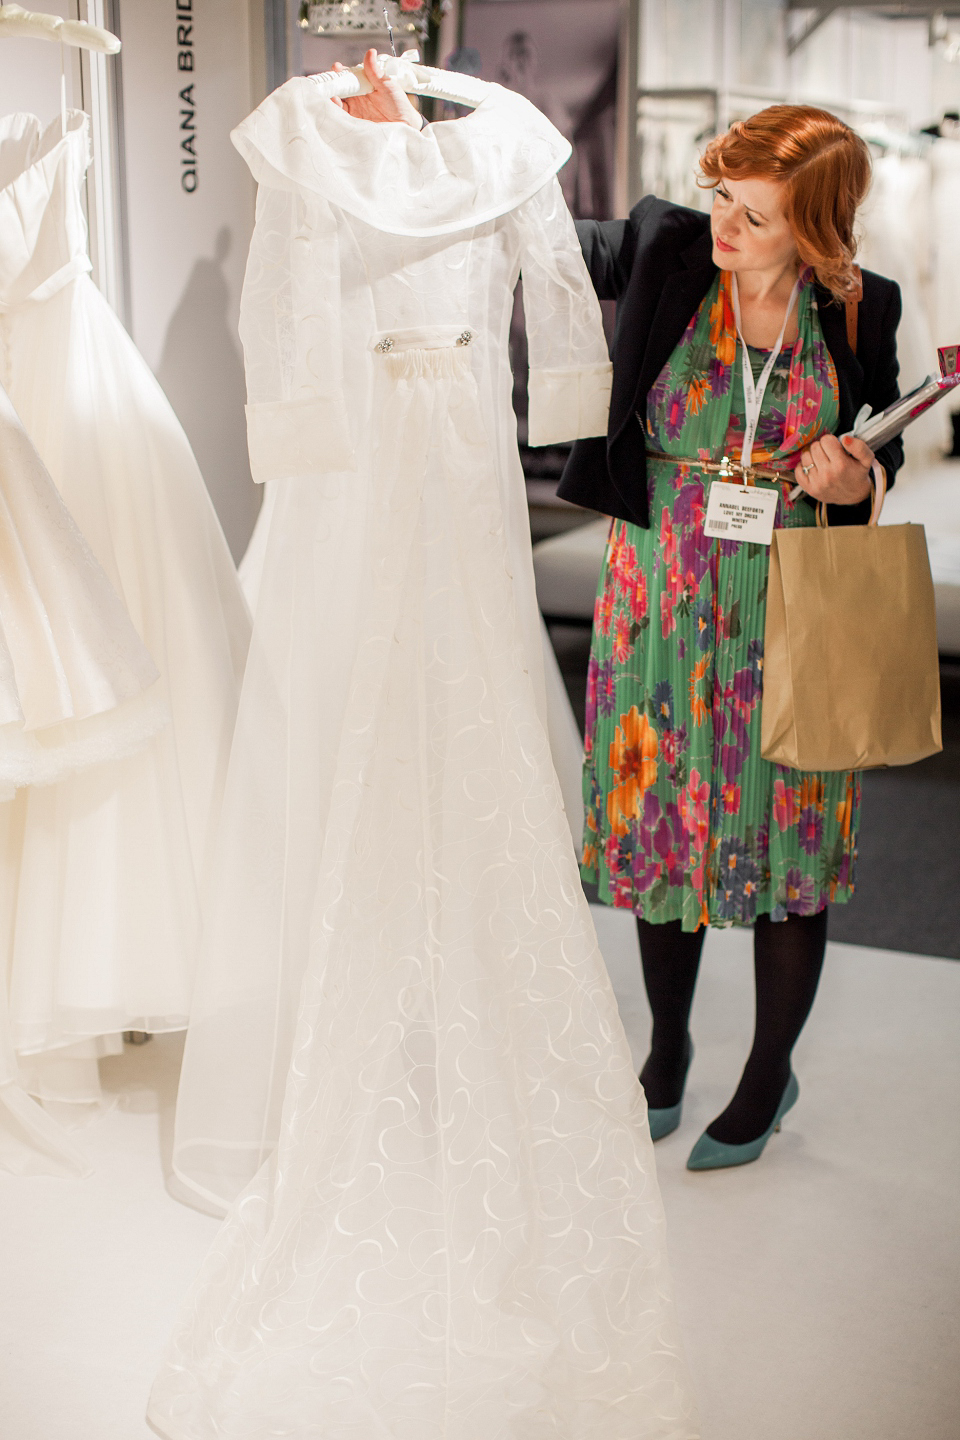 Qiana Bride at The White Gallery, London, April 2014